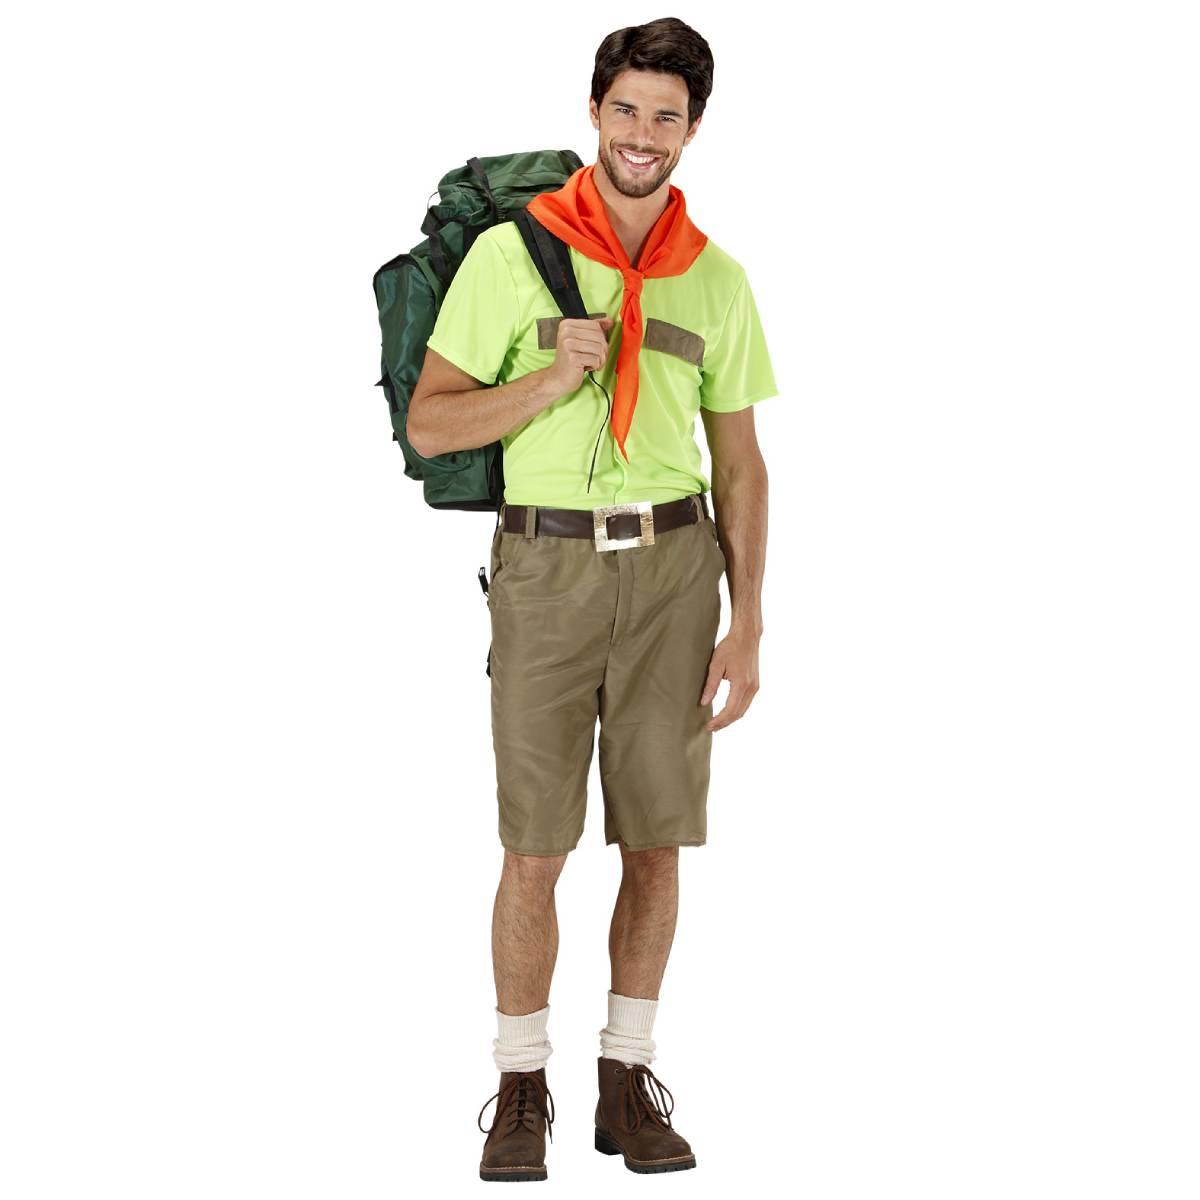 Boy Scout Costume for Men by Widmann 7607 from Karnival Costumes online party shop